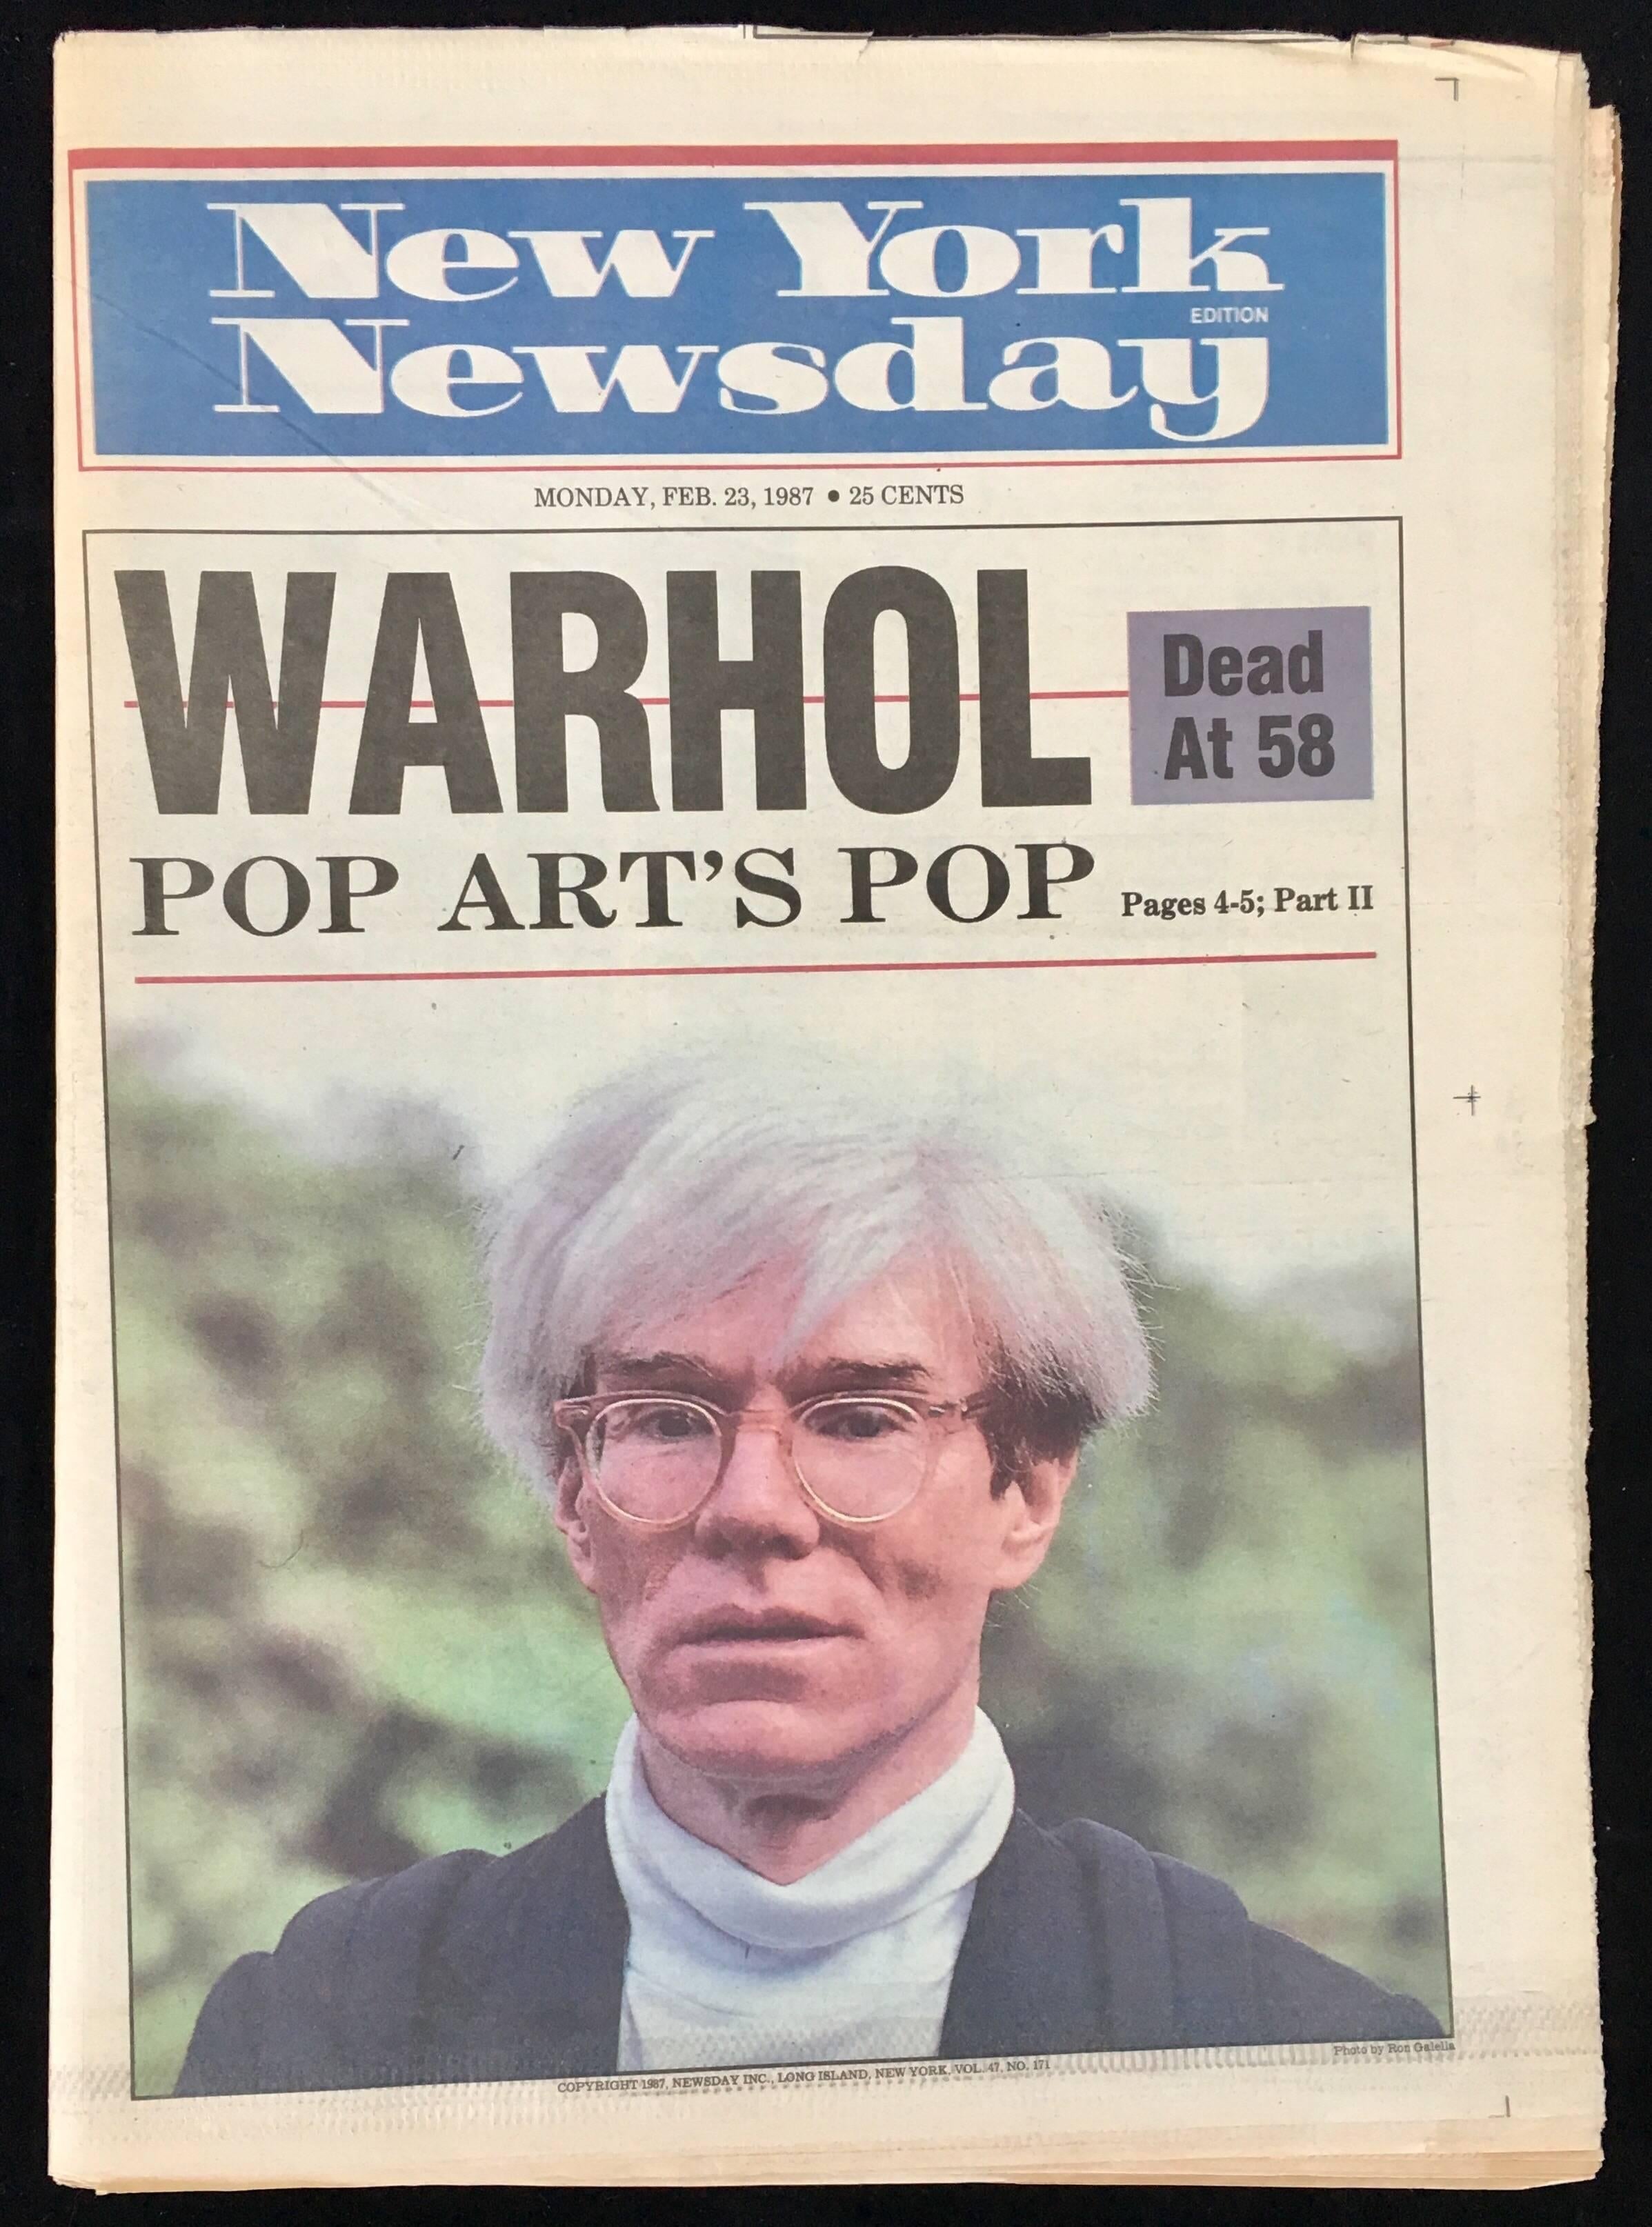 Warhol Dies! Set of 5 NY Newspapers - Pop Art Art by (after) Andy Warhol